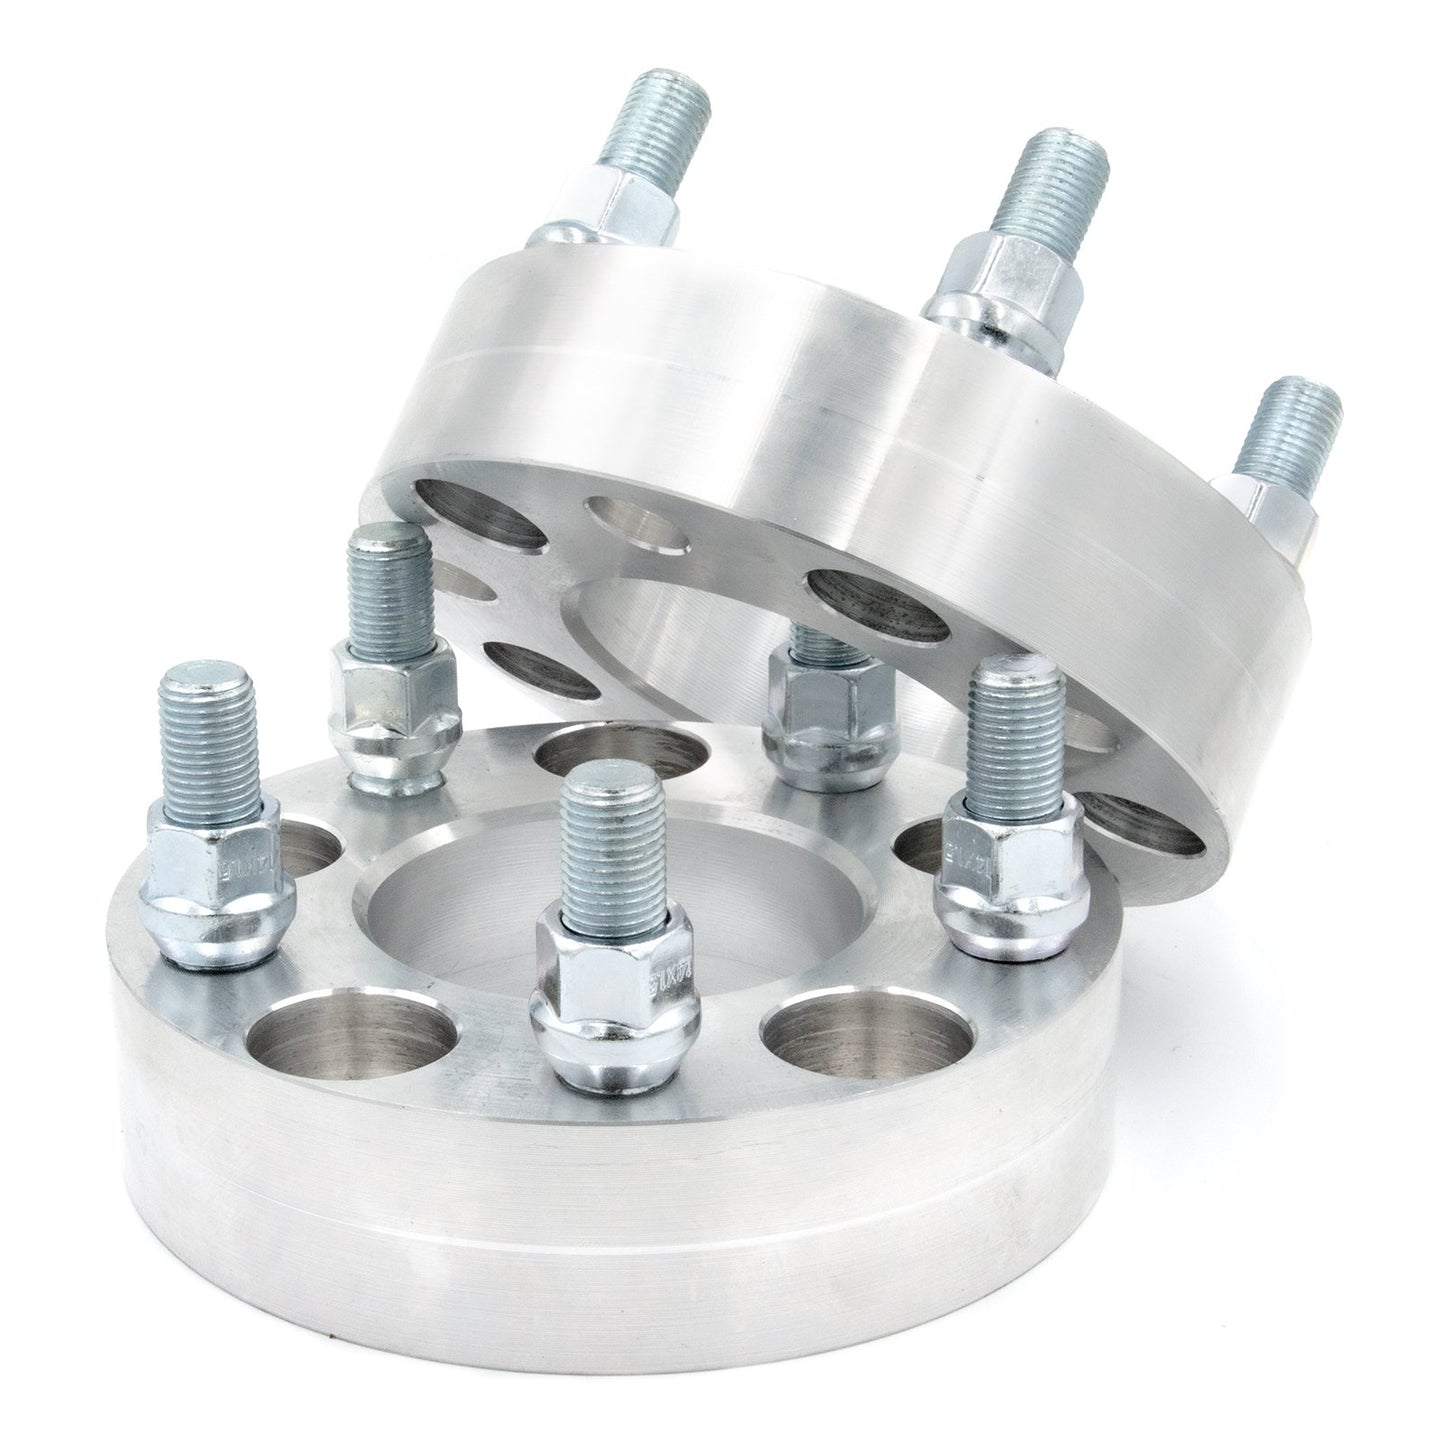 5x5" to 5x5.5" Wheel Spacer/Adapter - Thickness: 3/4"- 4"